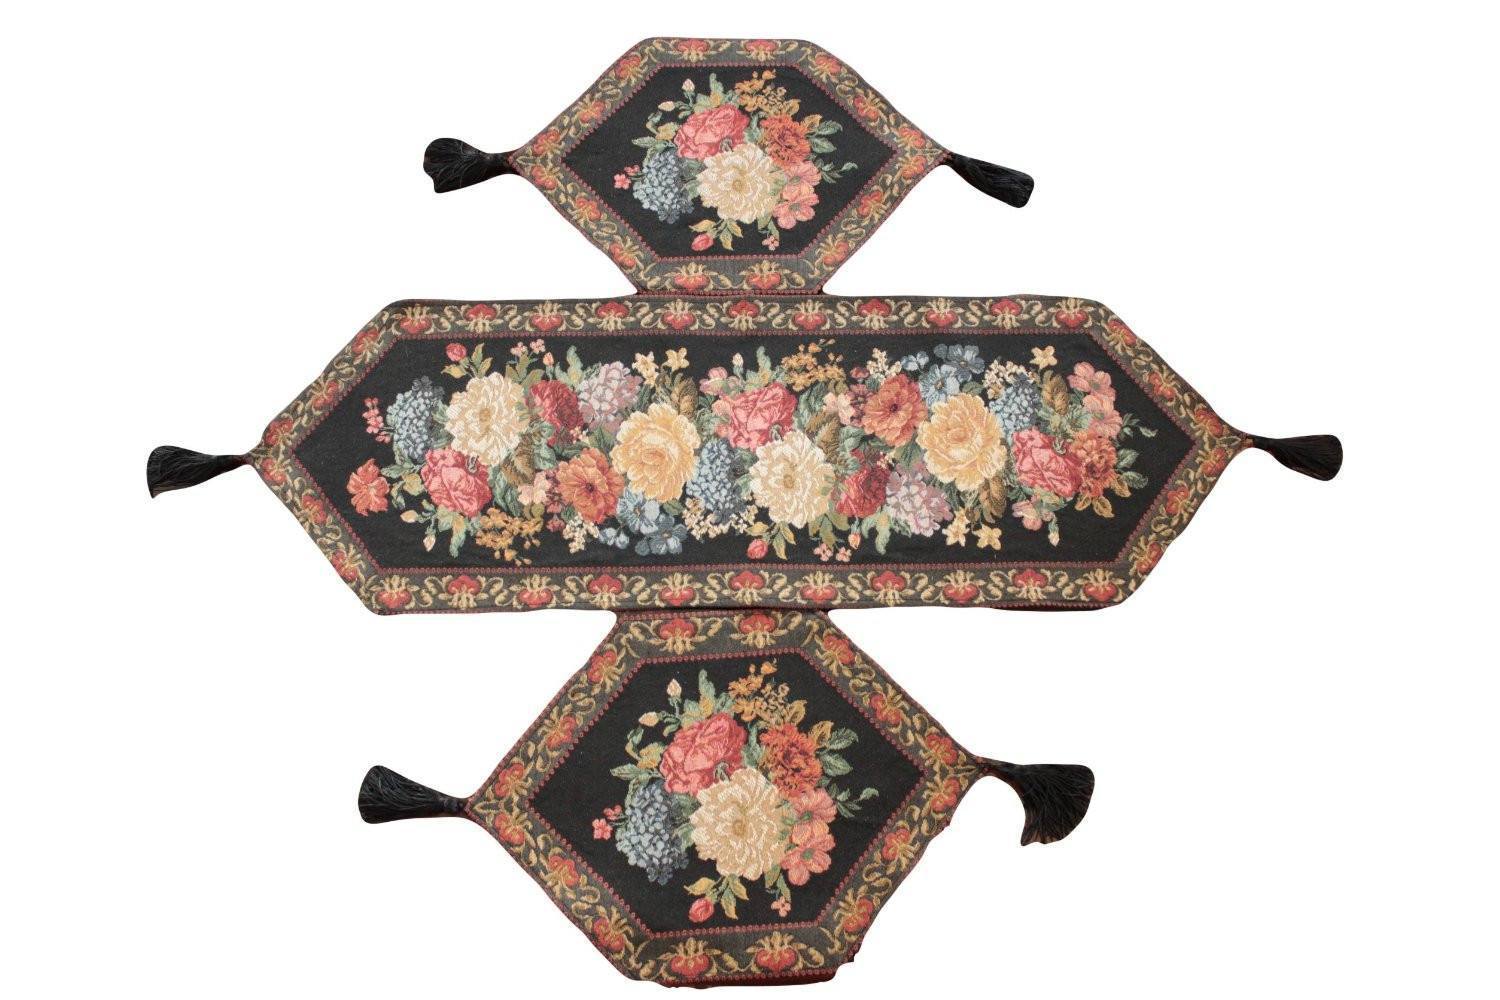 Tache Set of 3 Colorful Country Rustic Black Floral Midnight Awakening Table Runner (3089BL) - Tache Home Fashion